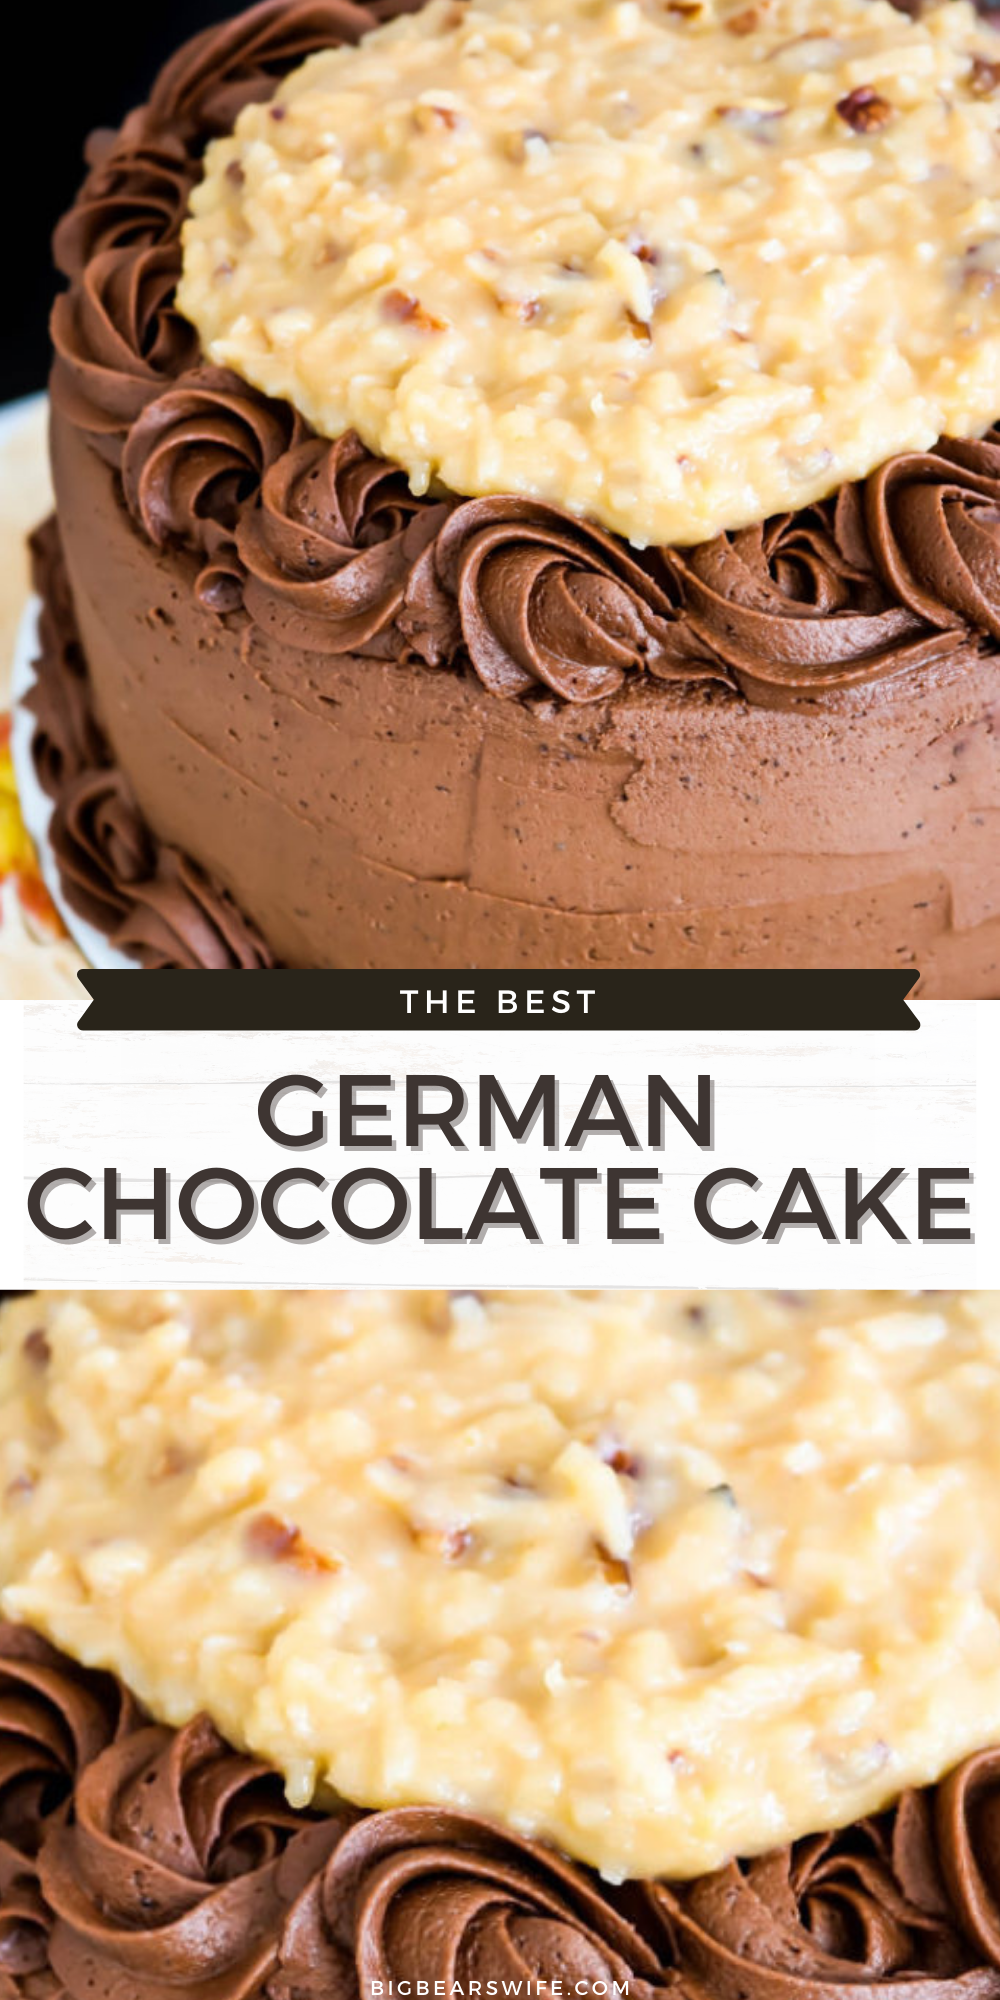 This German Chocolate Cake has three layers of amazing homemade chocolate cake, frosted with a homemade chocolate frosting and topped with a delicious pecan coconut filling!

 via @bigbearswife